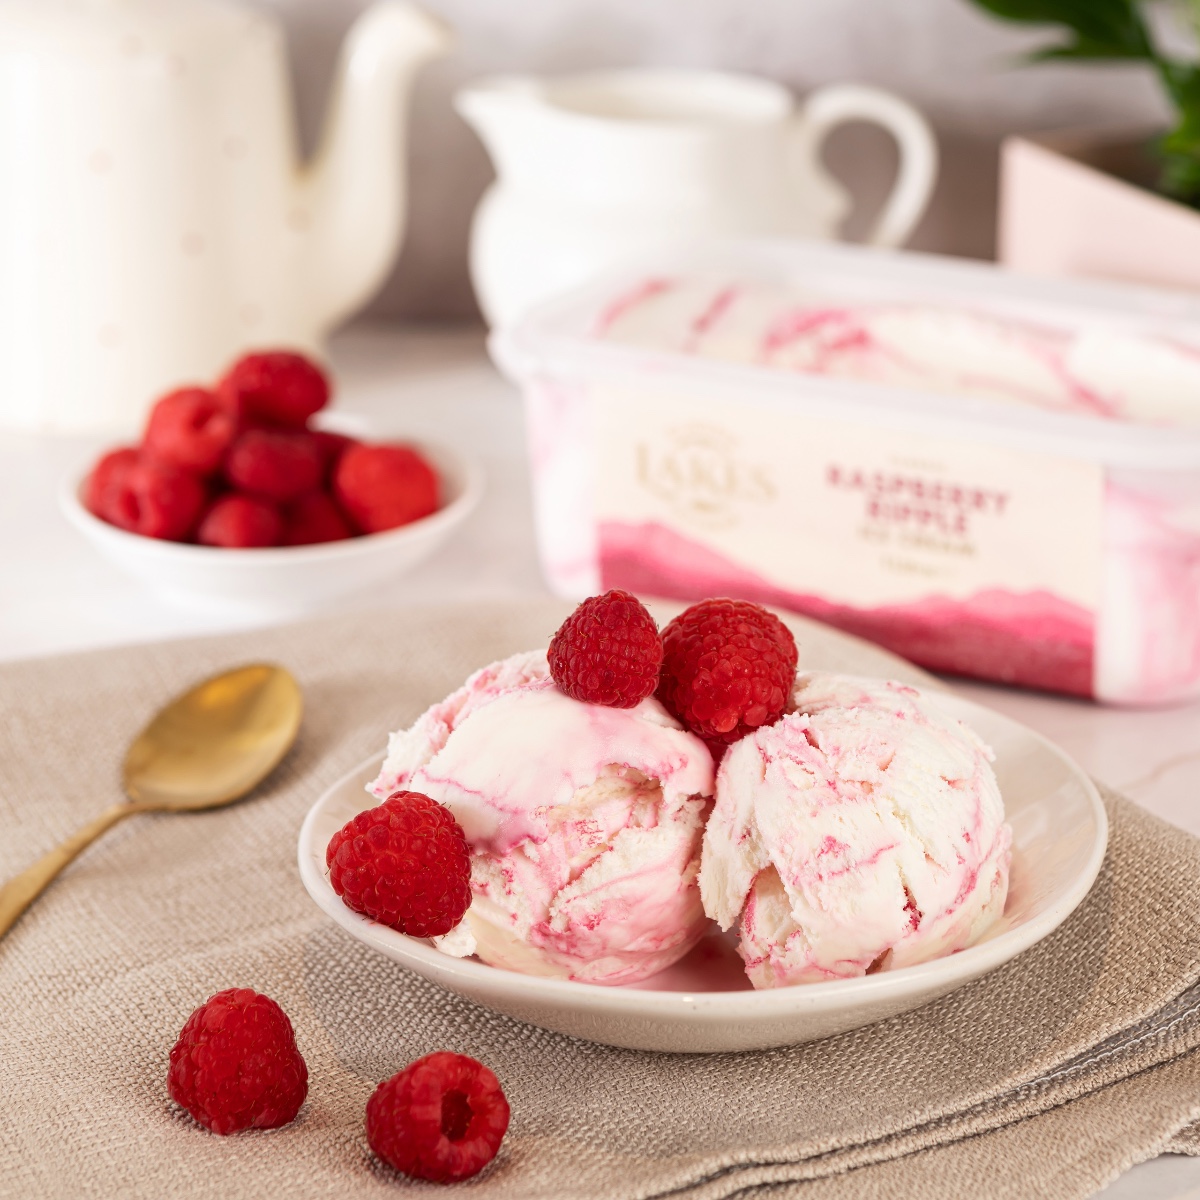 What's the tea? 🫖 We're not one to gossip but Raspberry Ripple is the flavour to enjoy on #NationalTeaDay 🙊